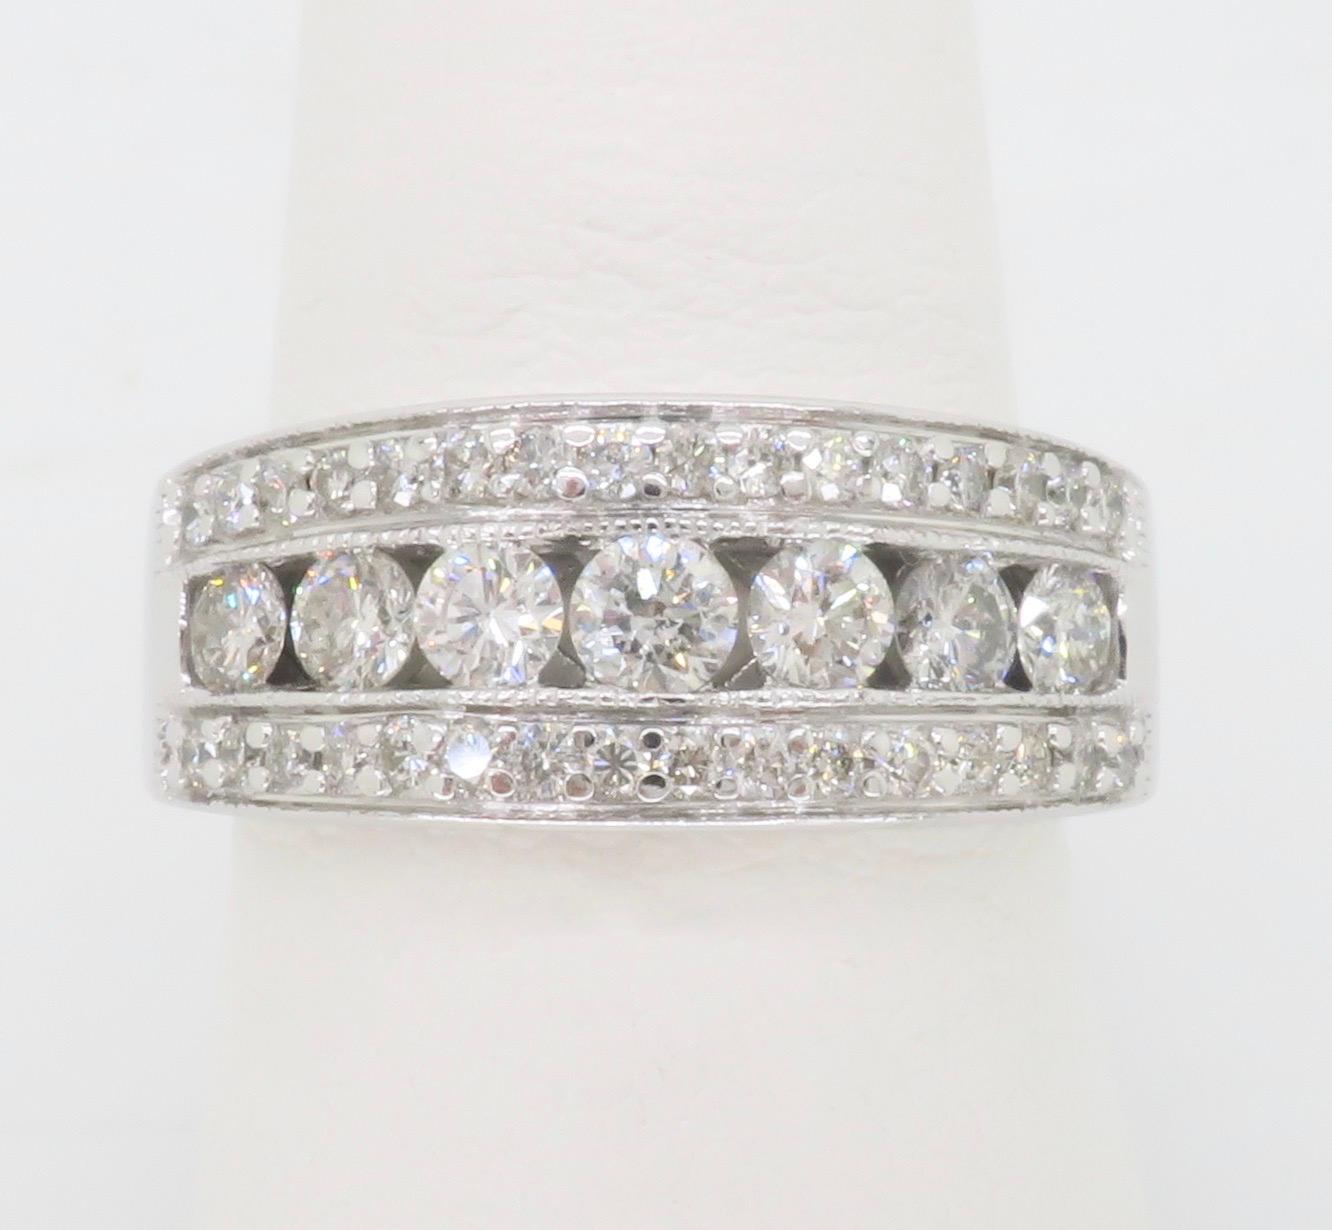 Three-row diamond band made with 1.10ctw of Round Brilliant cut diamonds. 

Diamond Cut: Round Brilliant 
Total Diamond Carat Weight: Approximately 1.10CTW
Average Diamond Color: F-I
Average Diamond Clarity: SI1-I1
Metal: 14k White Gold
Ring Size: 7